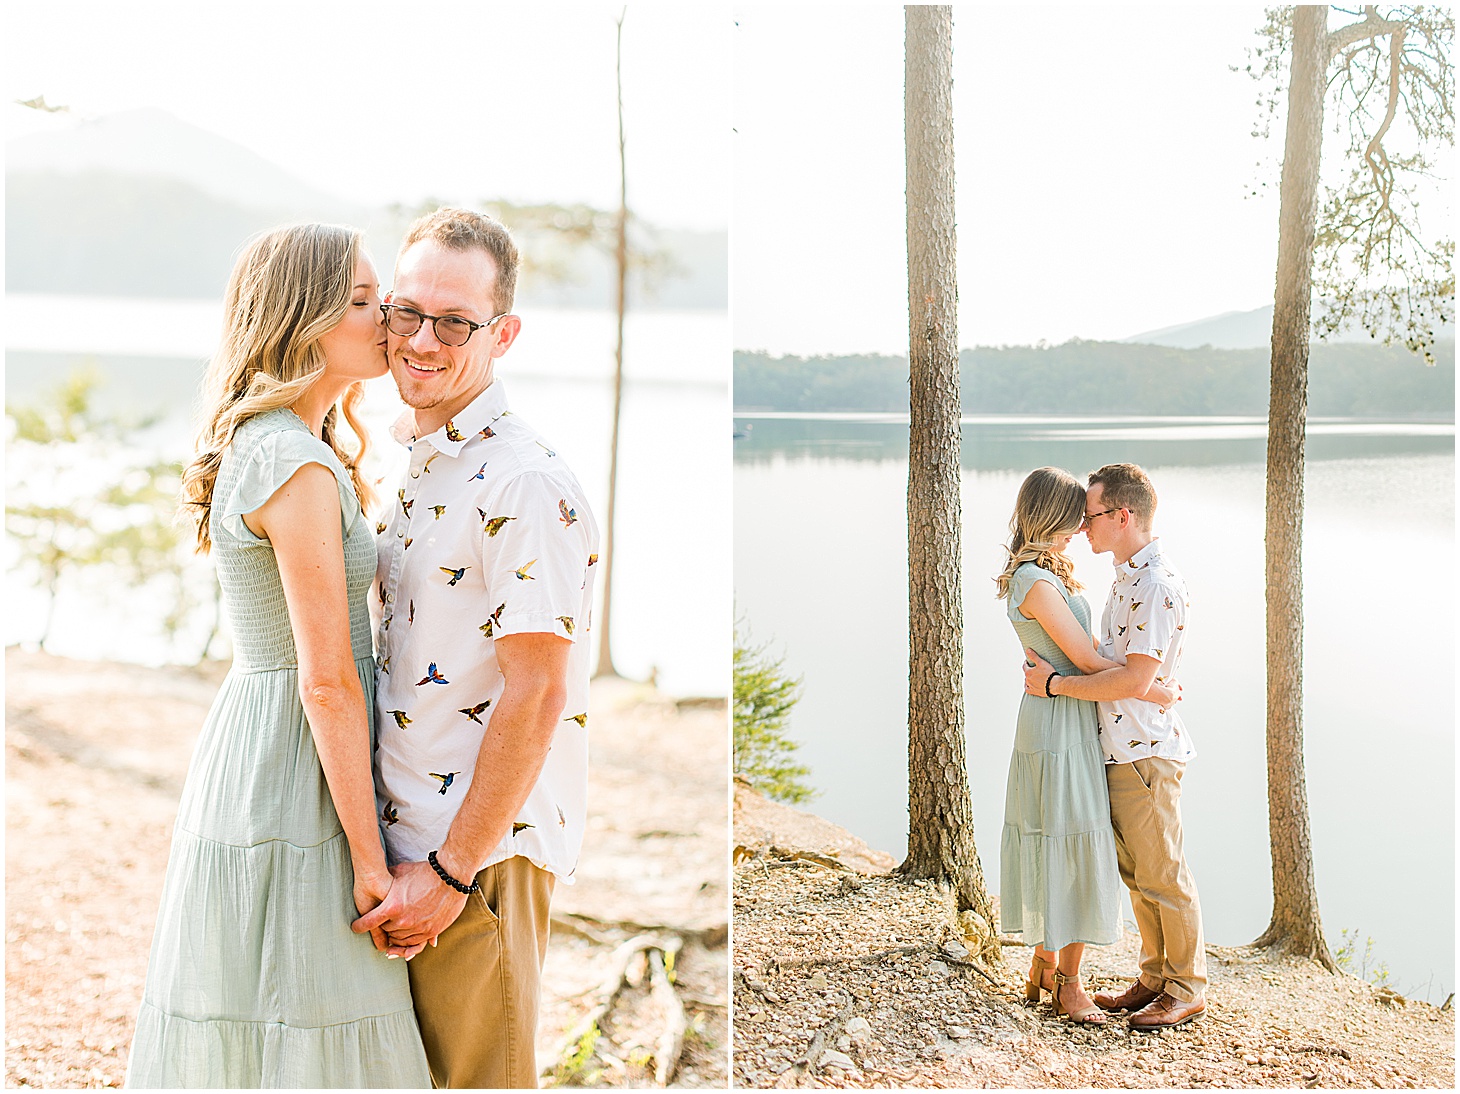 carvinscove_roanokeengagementsession_virginiaweddingphotographer_vaweddingphotographer_photo_0005.jpg